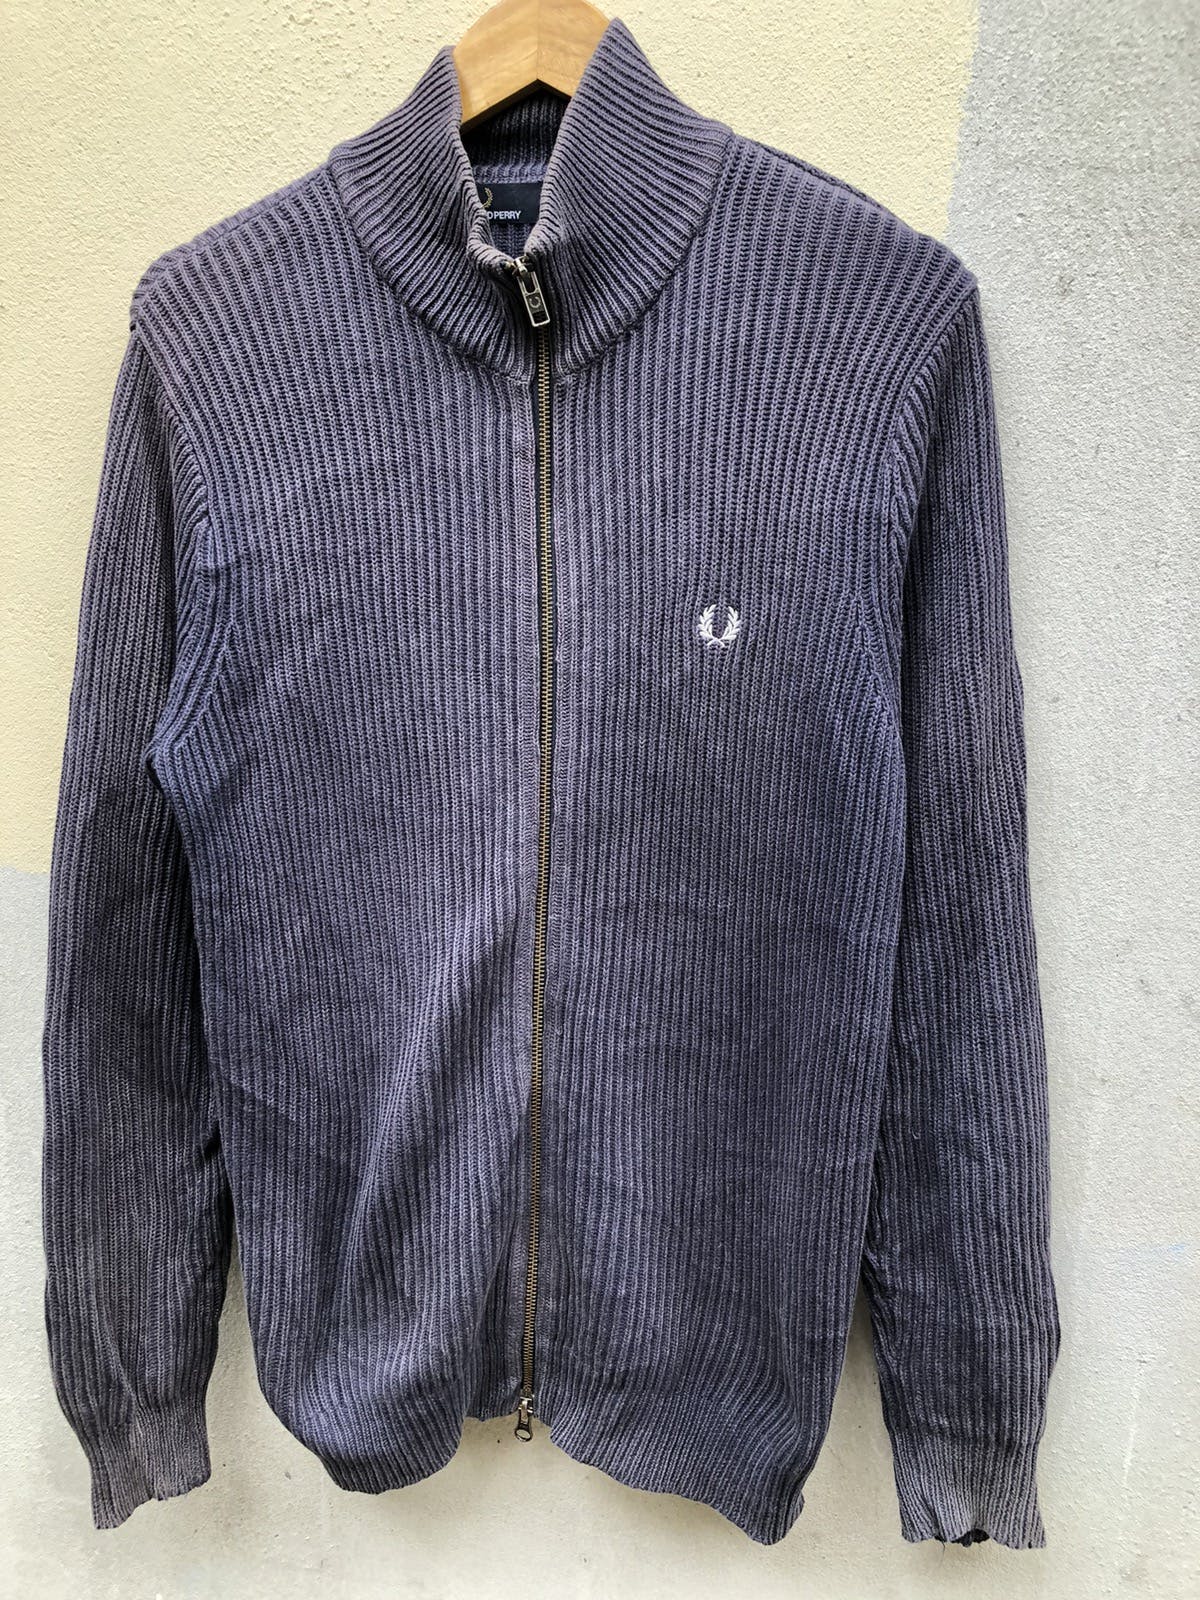 Vintage Fred Perry sun faded Zip up Sweater’s - 2